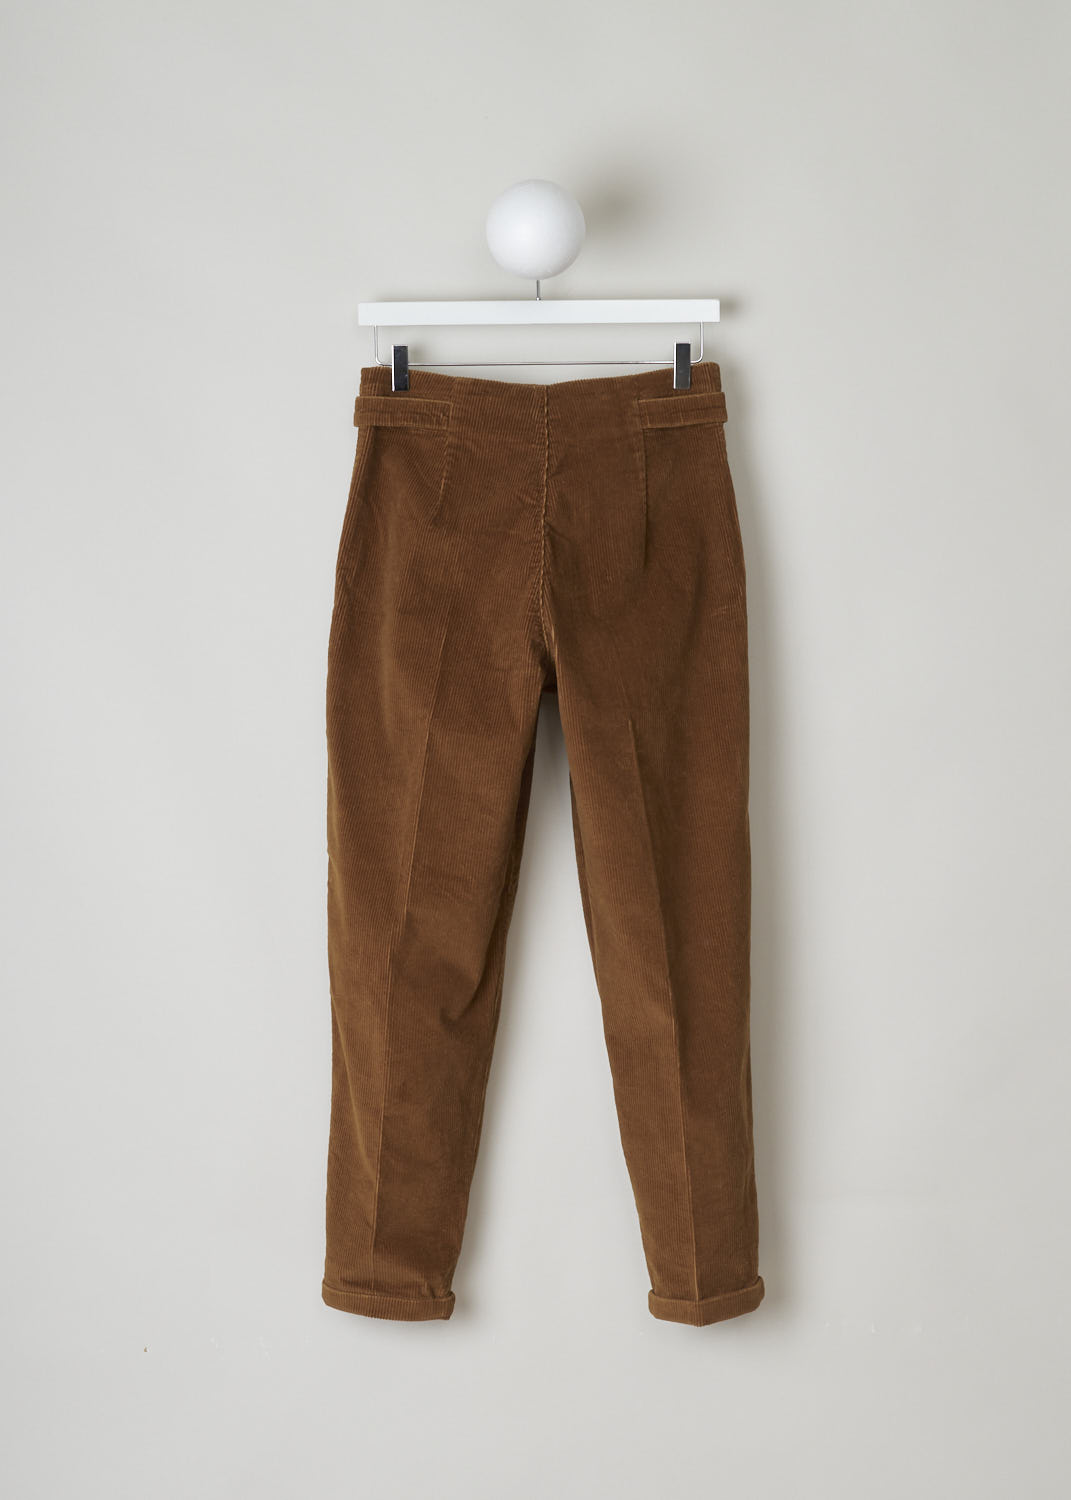 CLOSED, BROWN CORDUROY TROUSERS, C91044_38W_20_928, Brown, Back, These brown corduroy trousers feature a concealed zip and button closure. In the front, these trousers have slanted pockets. The tapered pants legs with a folded hem. 
